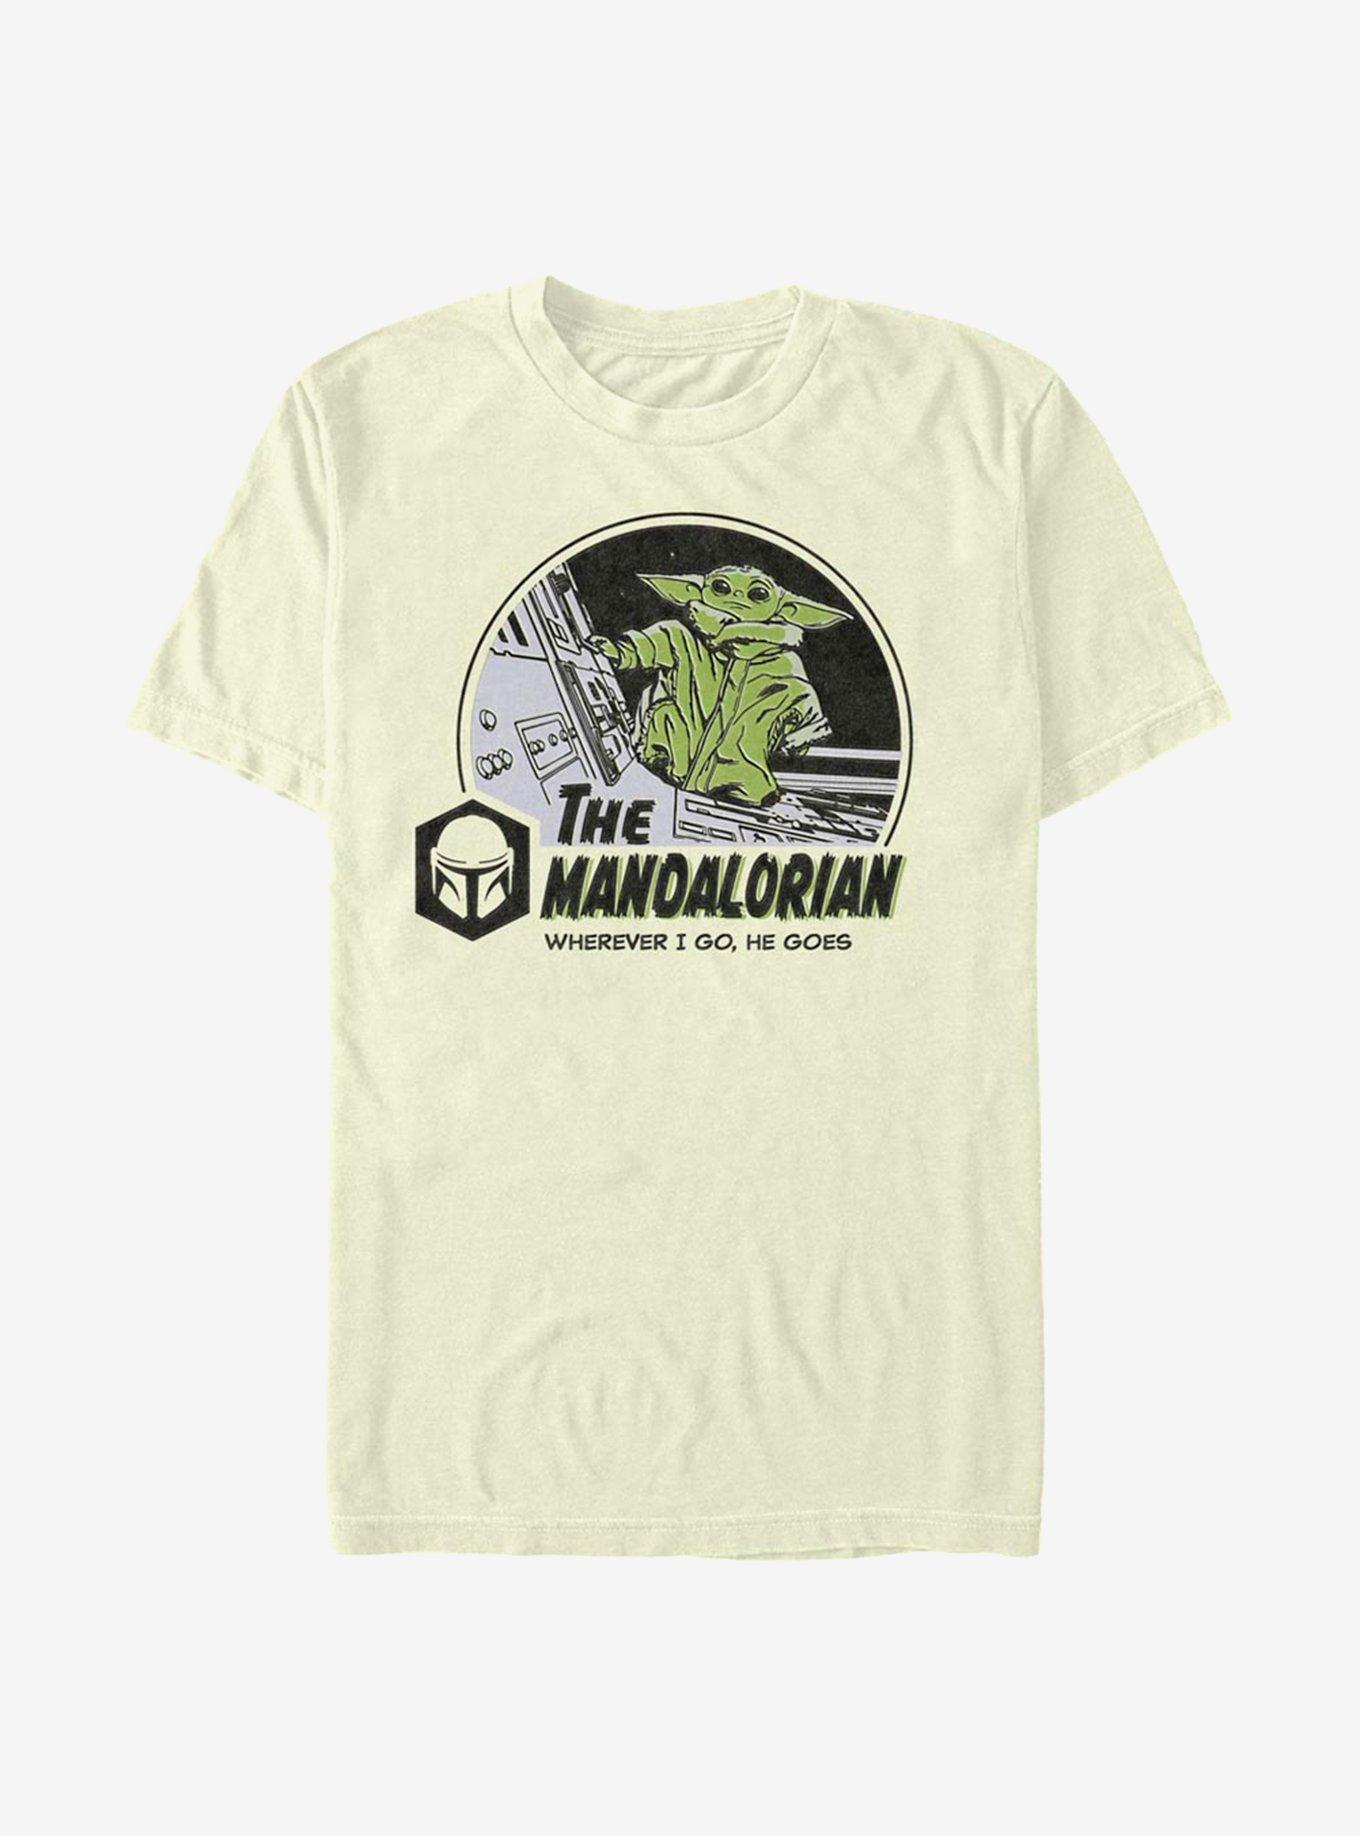 Star Wars The Mandalorian The Child In Space T-Shirt, NATURAL, hi-res